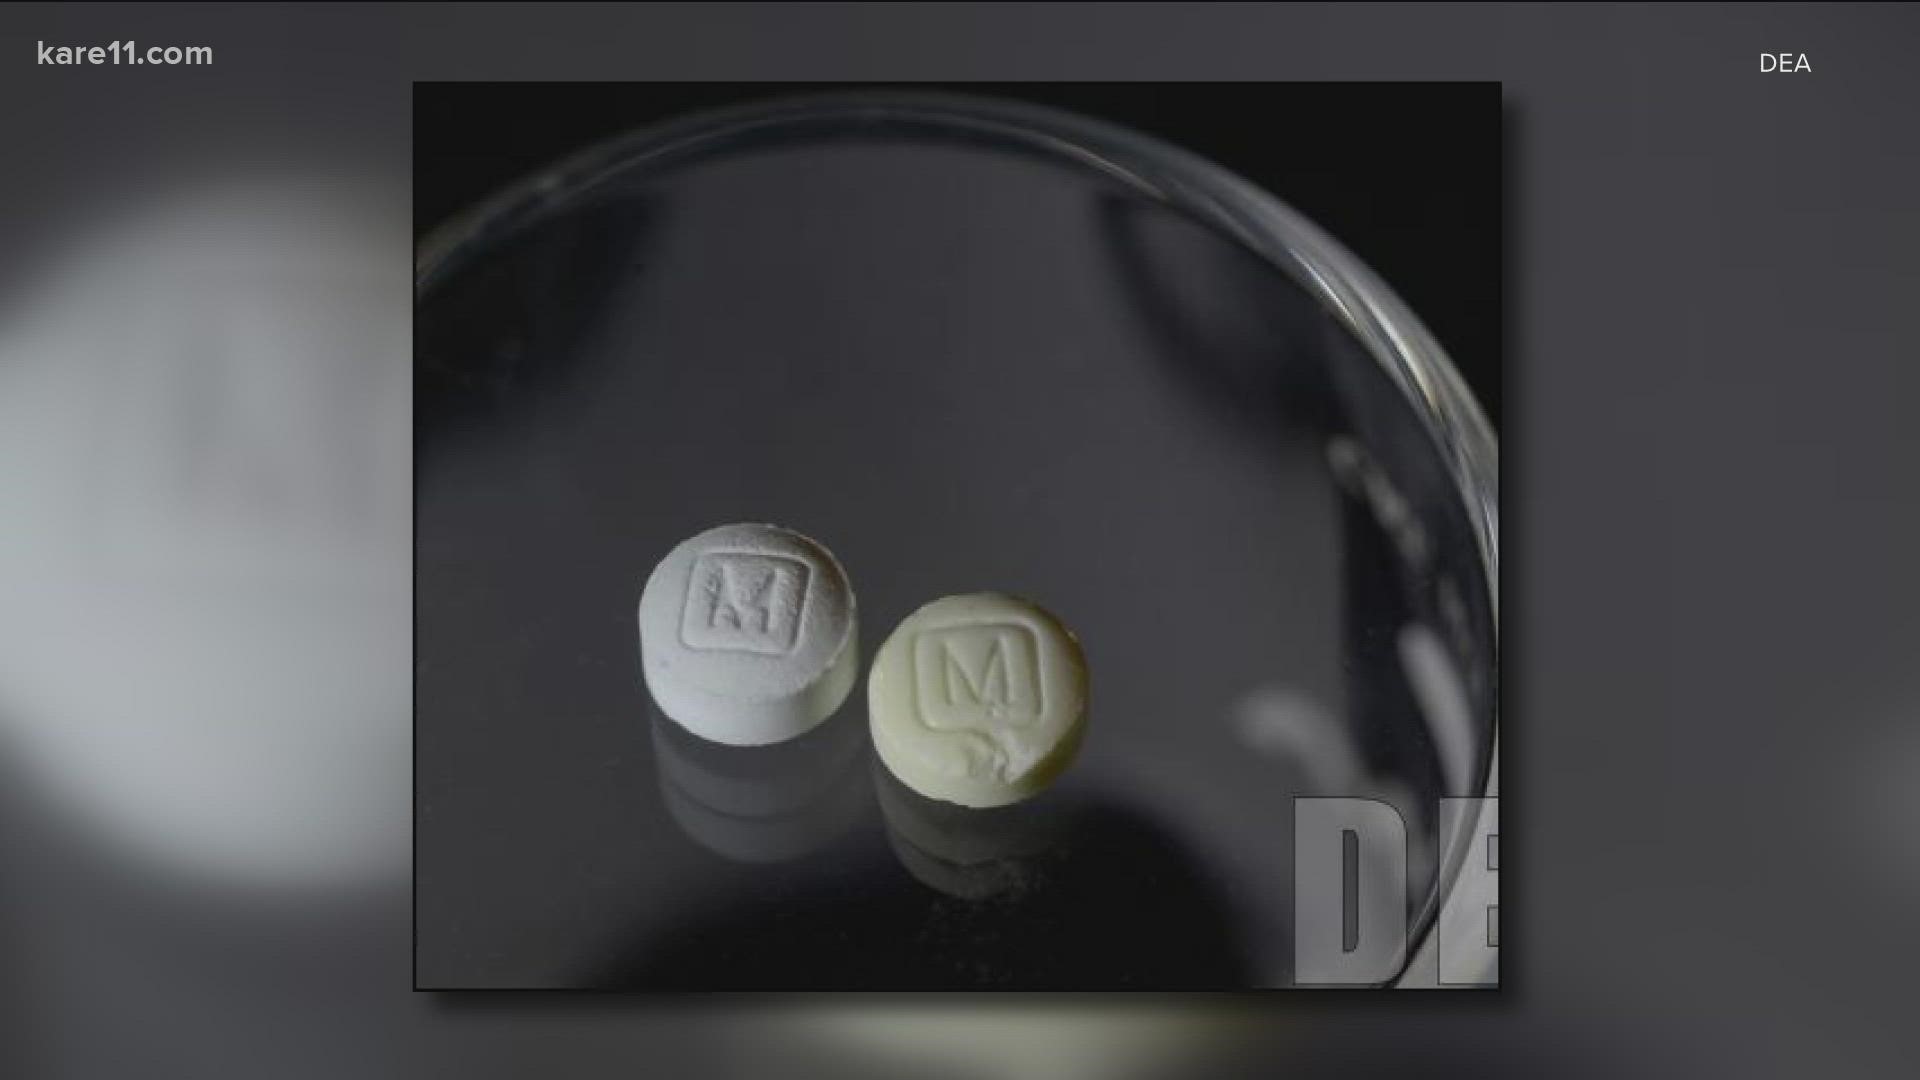 So far this year, the DEA has seized more than 9.5 million fake prescription pills, which is more than the last two years combined.